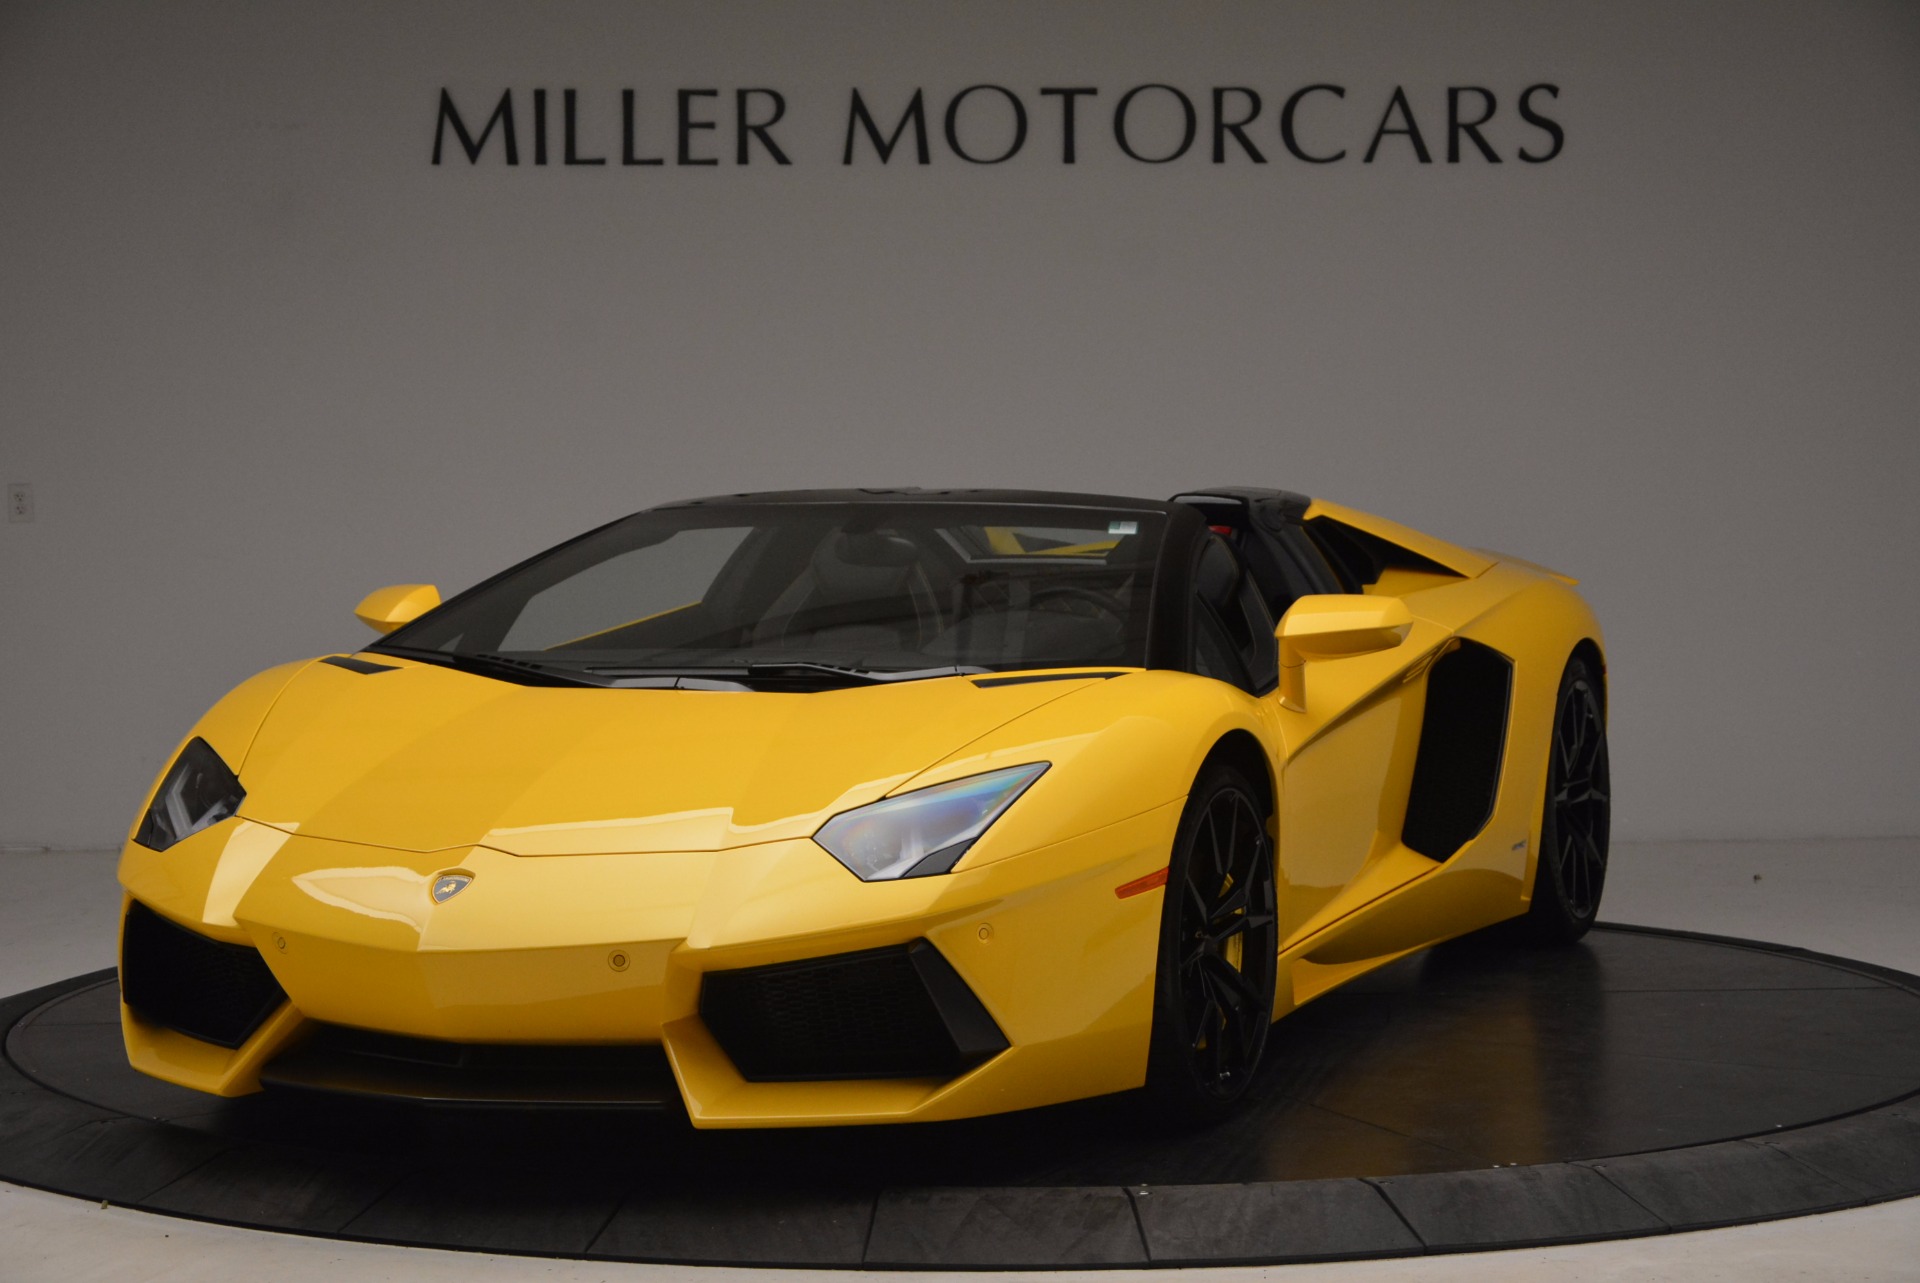 Used 2015 Lamborghini Aventador LP 700-4 Roadster for sale Sold at Bentley Greenwich in Greenwich CT 06830 1